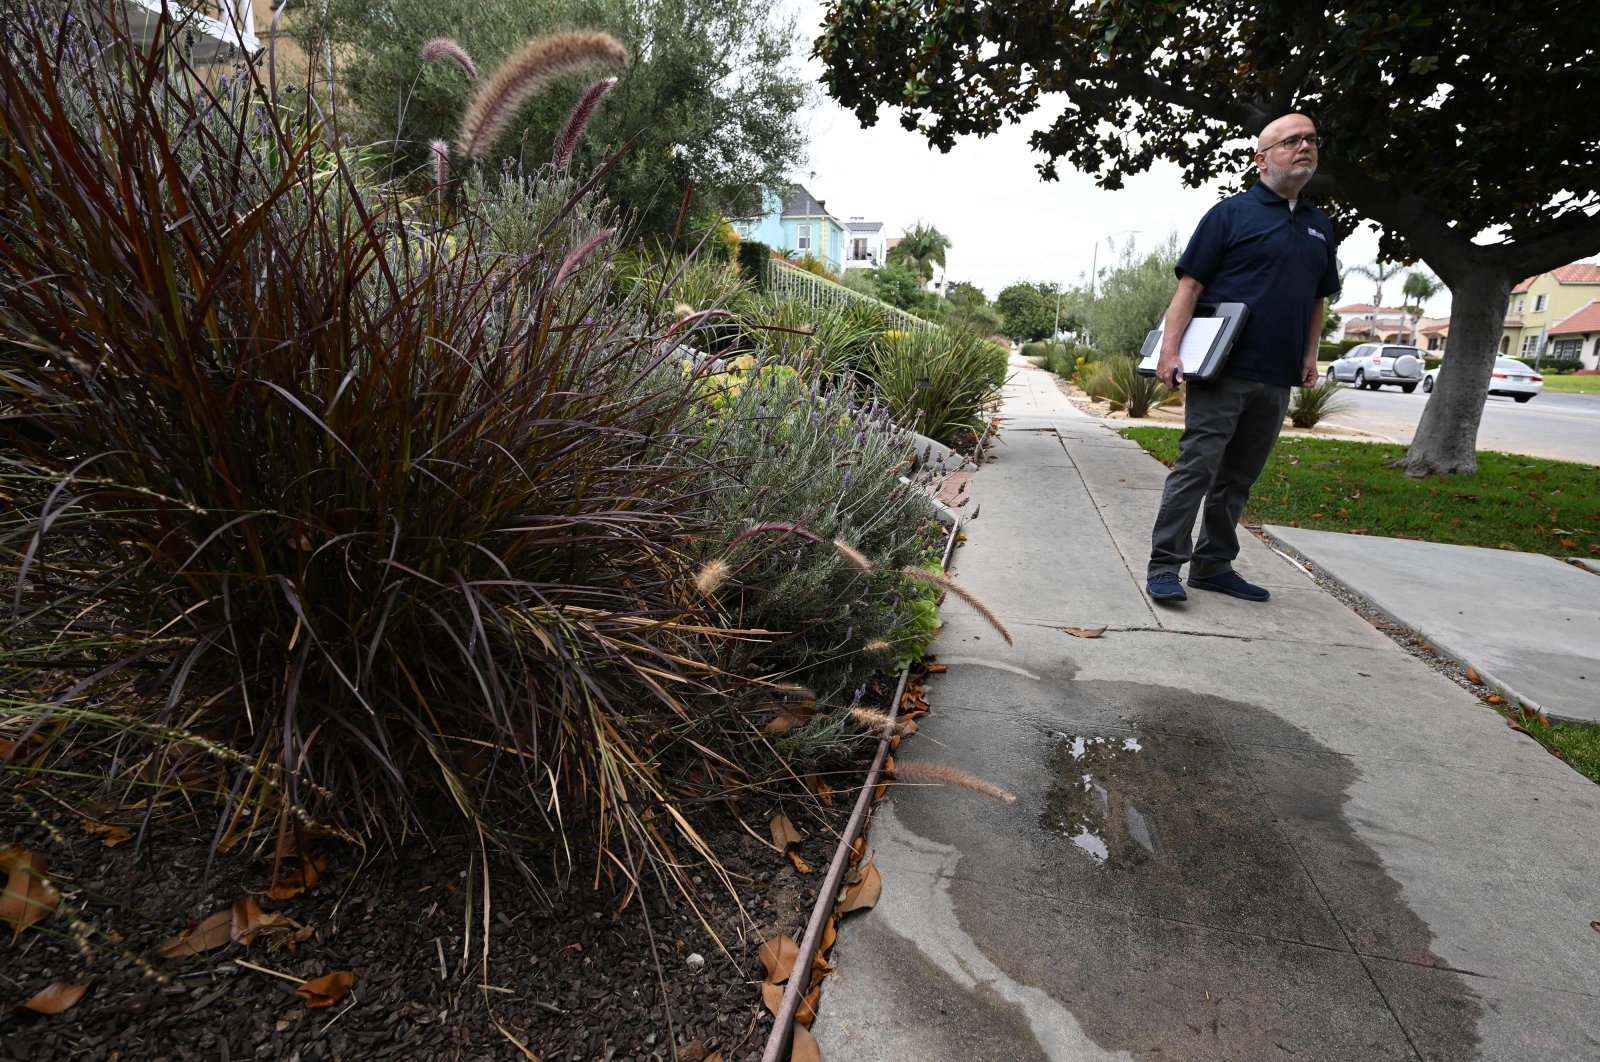 Los Angeles Department of Water and Power (LADWP) Water Conservation Specialist Damon Ayala stops in front of water pooling on the pavement while on a patrol in search of illegal lawn watering and irrigation leakage, Los Angeles, U.S., July 6, 2022. (AFP Photo)